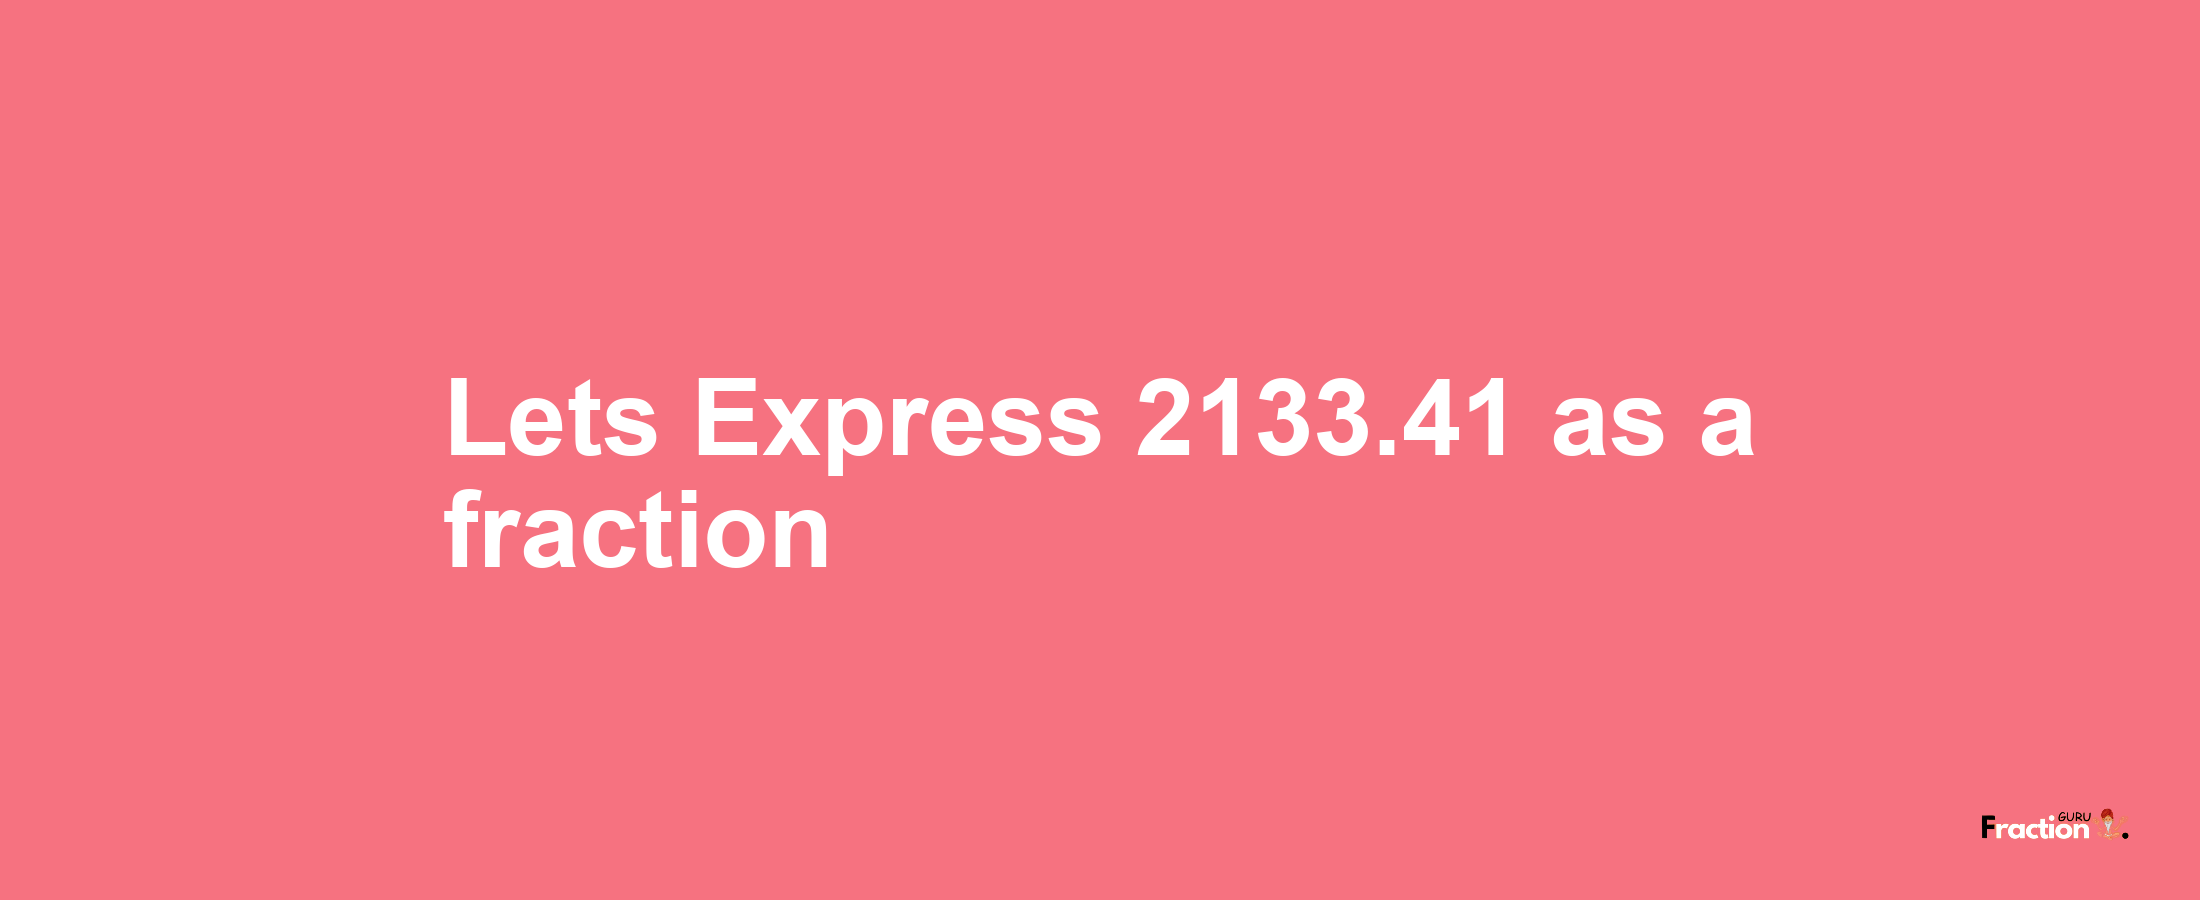 Lets Express 2133.41 as afraction